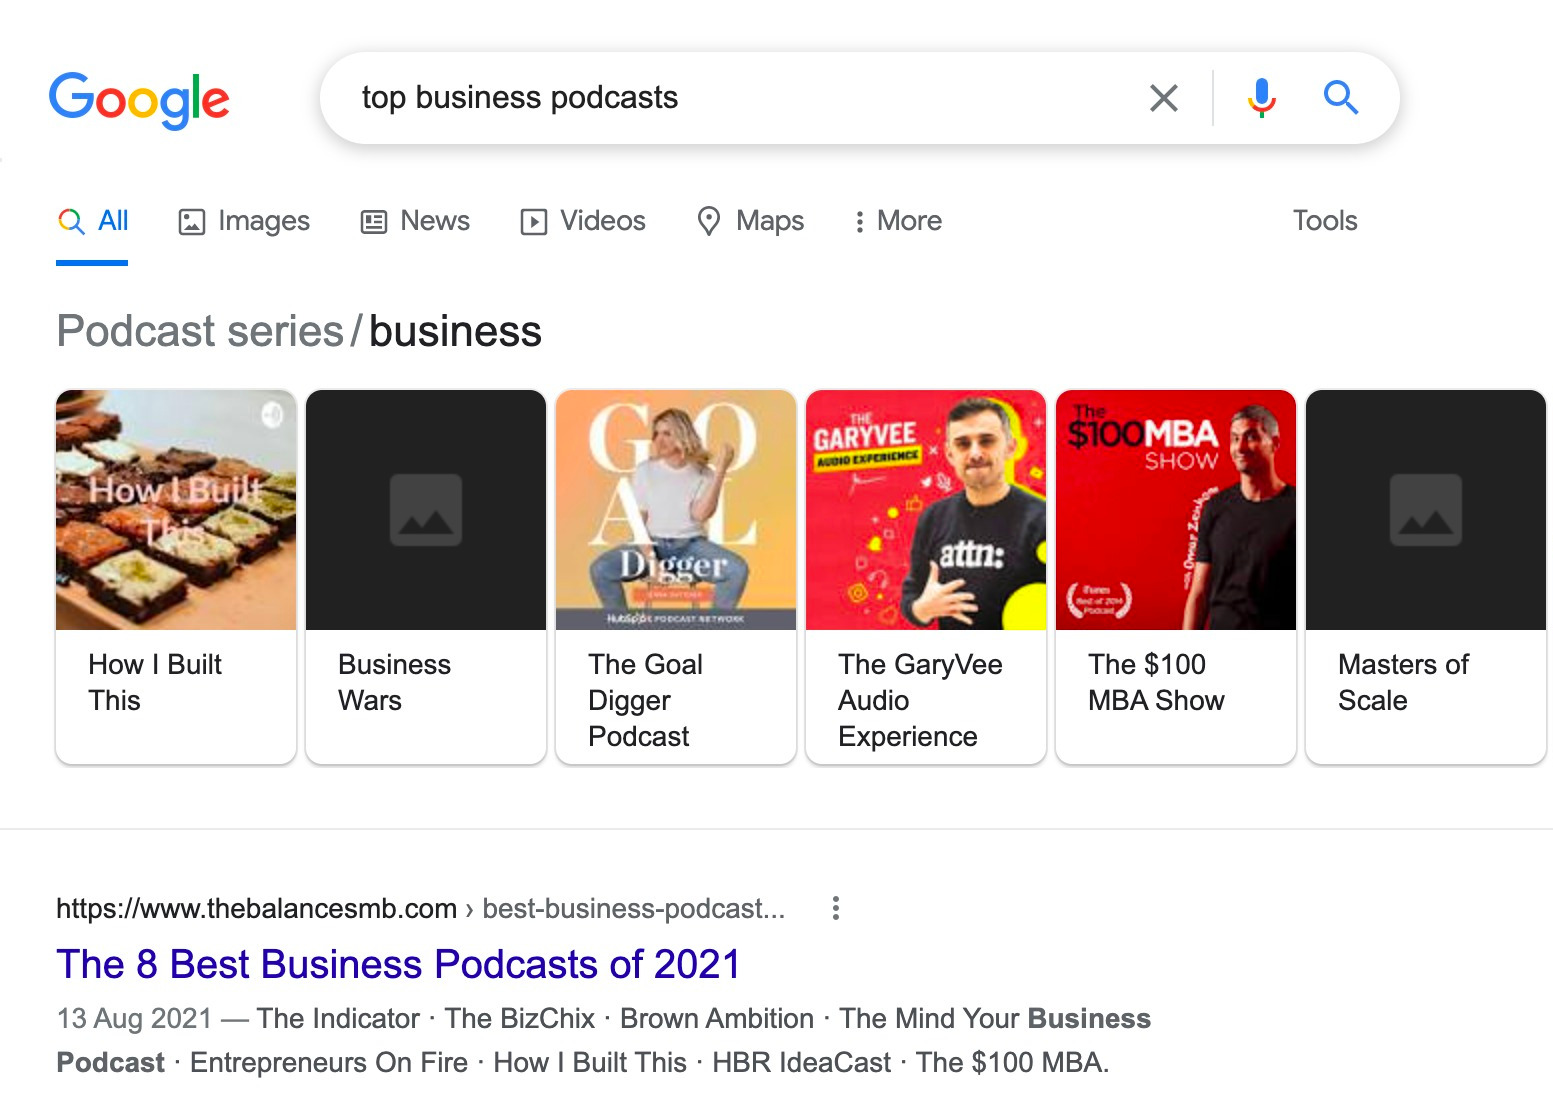 Google results showing top business podcasts